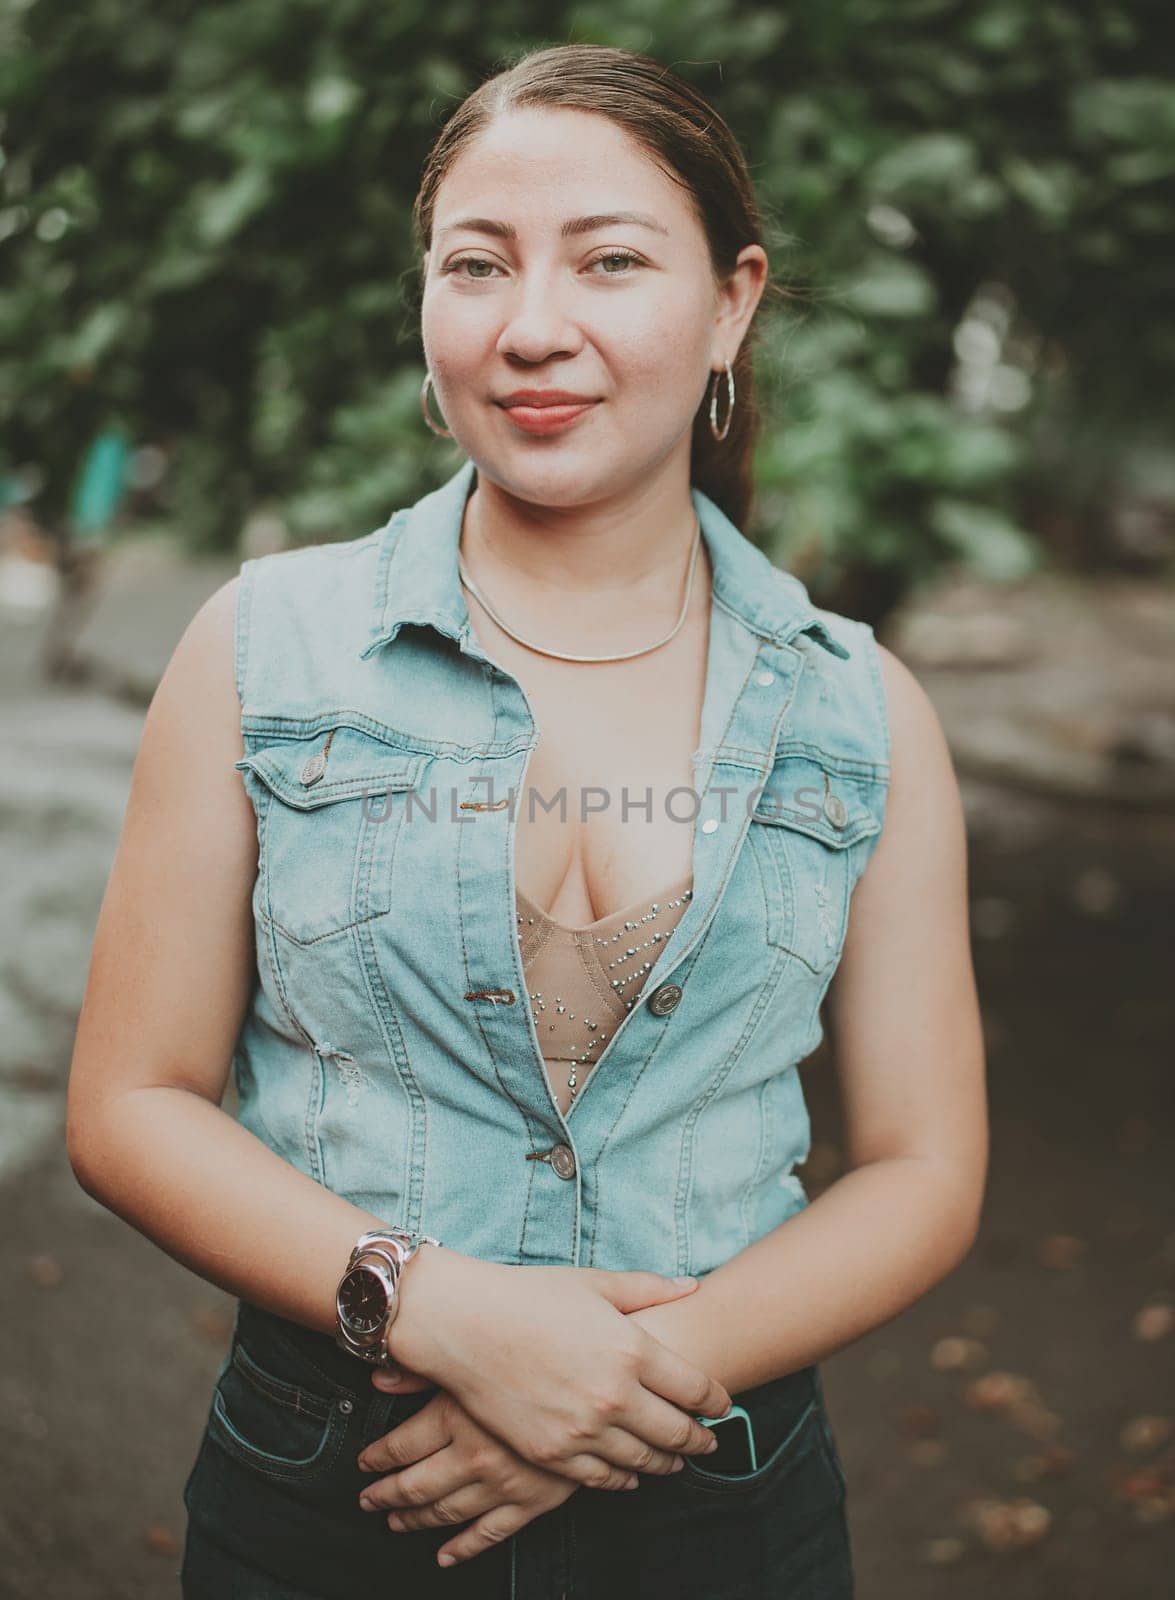 Portrait of attractive latin girl smiling outdoors. Portrait of Latin American girl face looking and smiling at the camera. Portrait of young Nicaraguan woman smiling at camera by isaiphoto